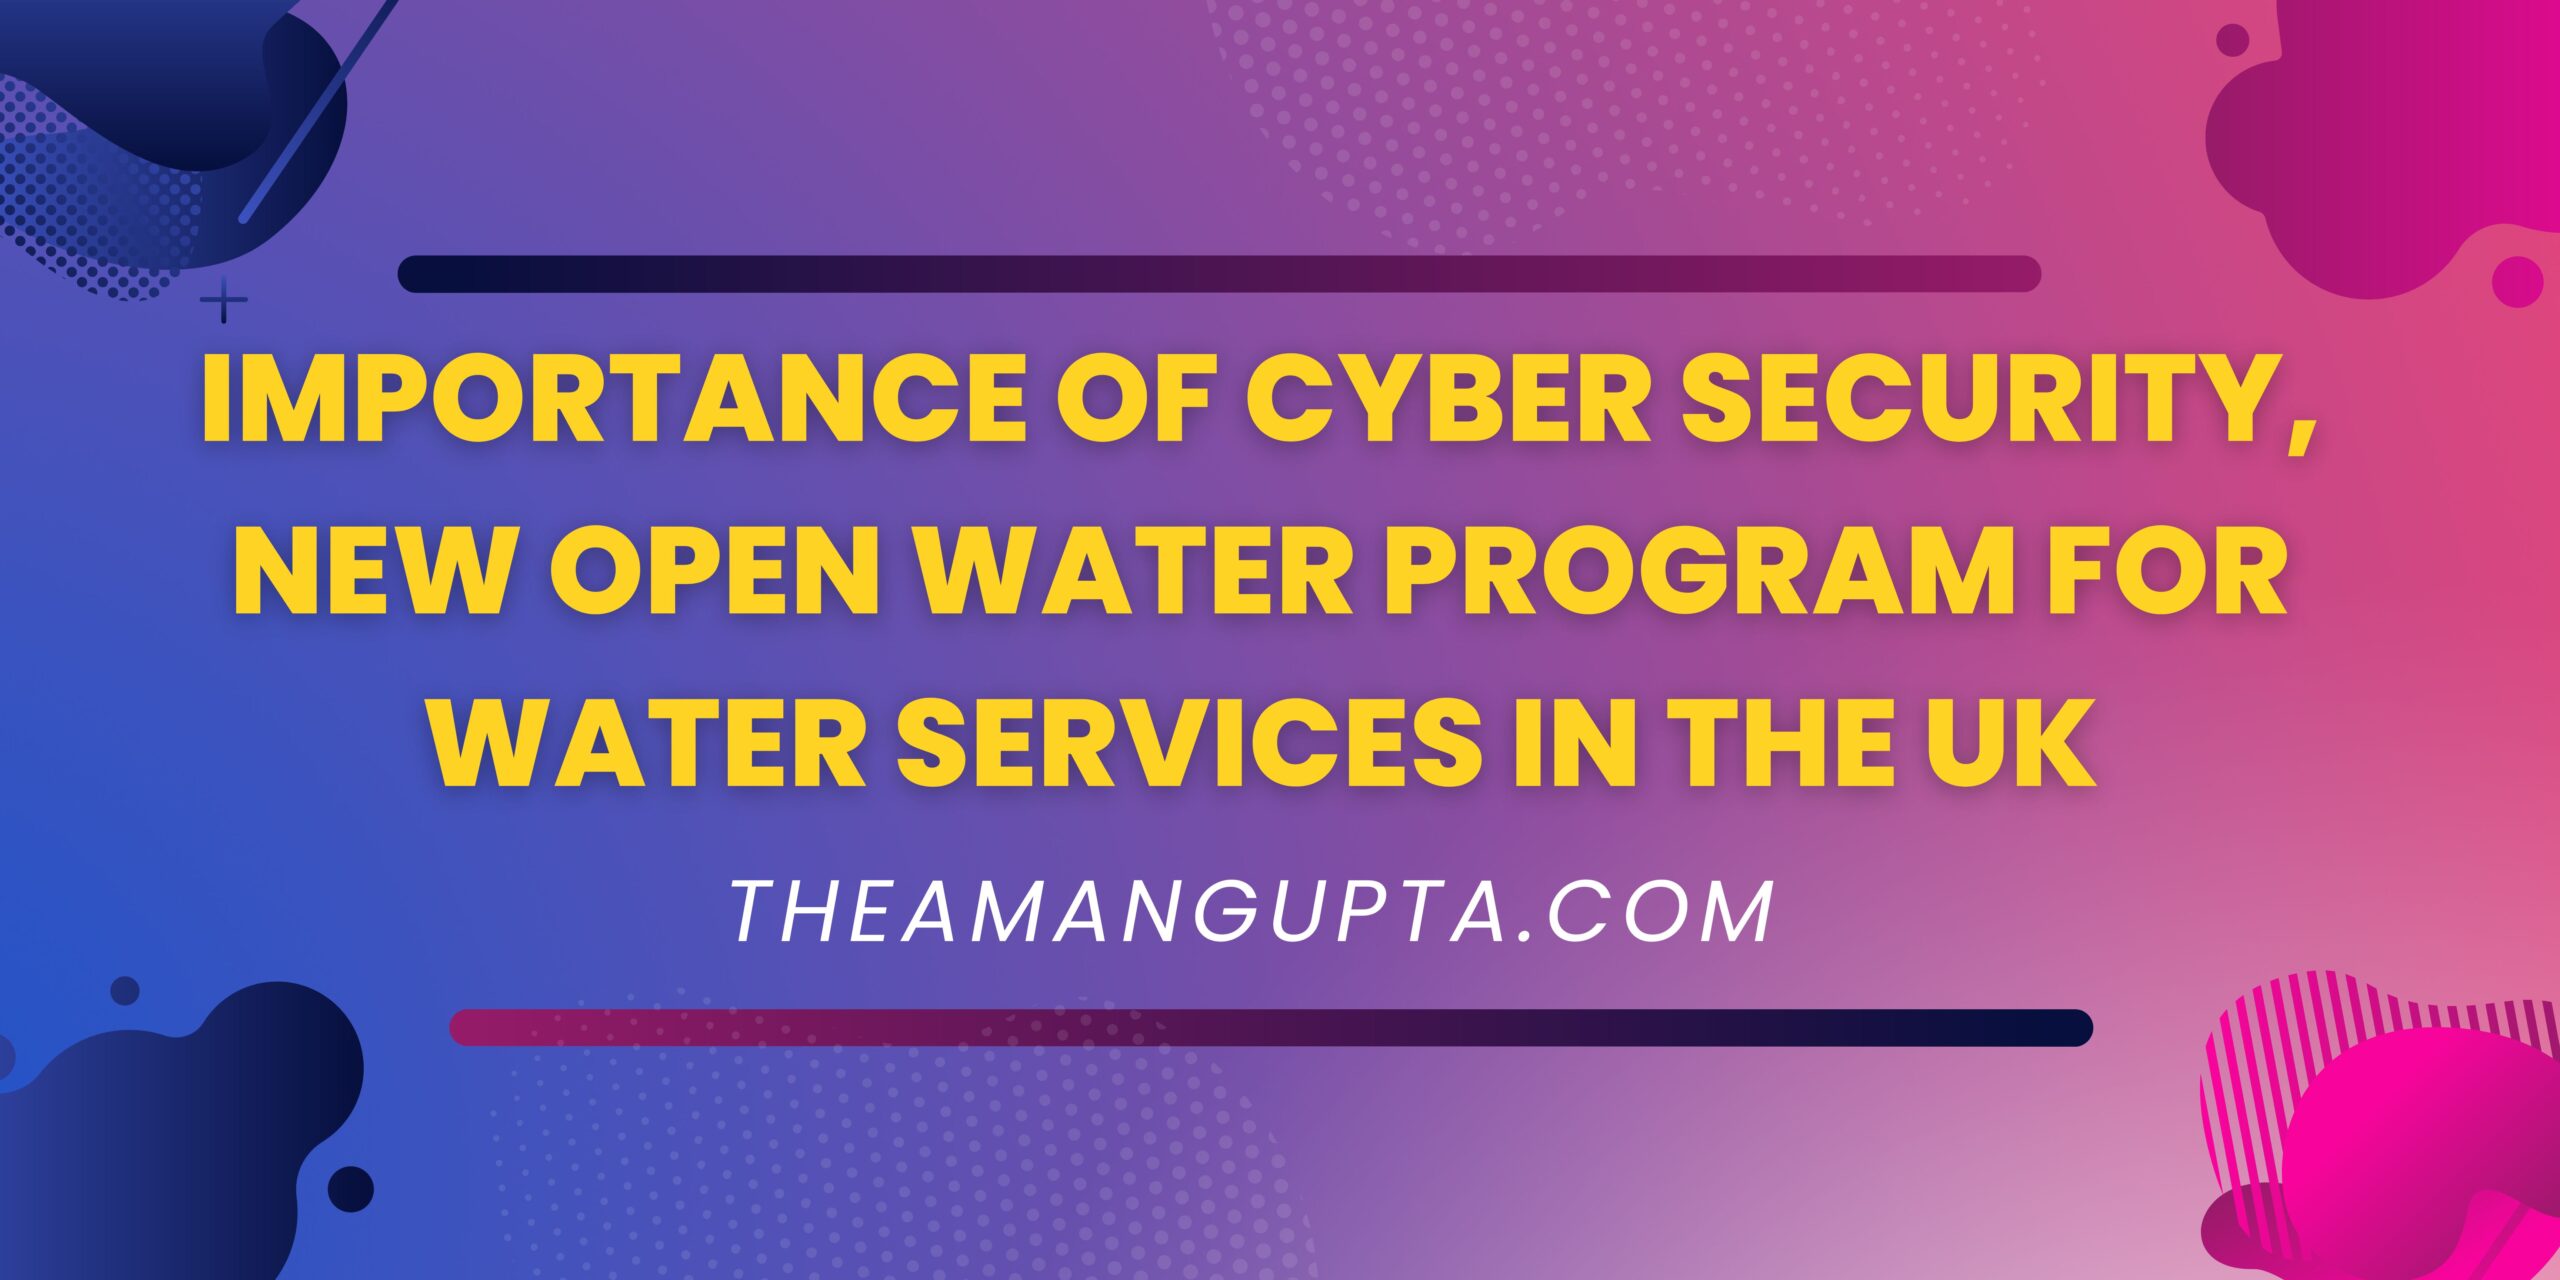 Importance Of Cyber Security, New Open Water Program For Water Services In The UK|Water Program For Water Services In The UK|Theamangupta|Theamangupta